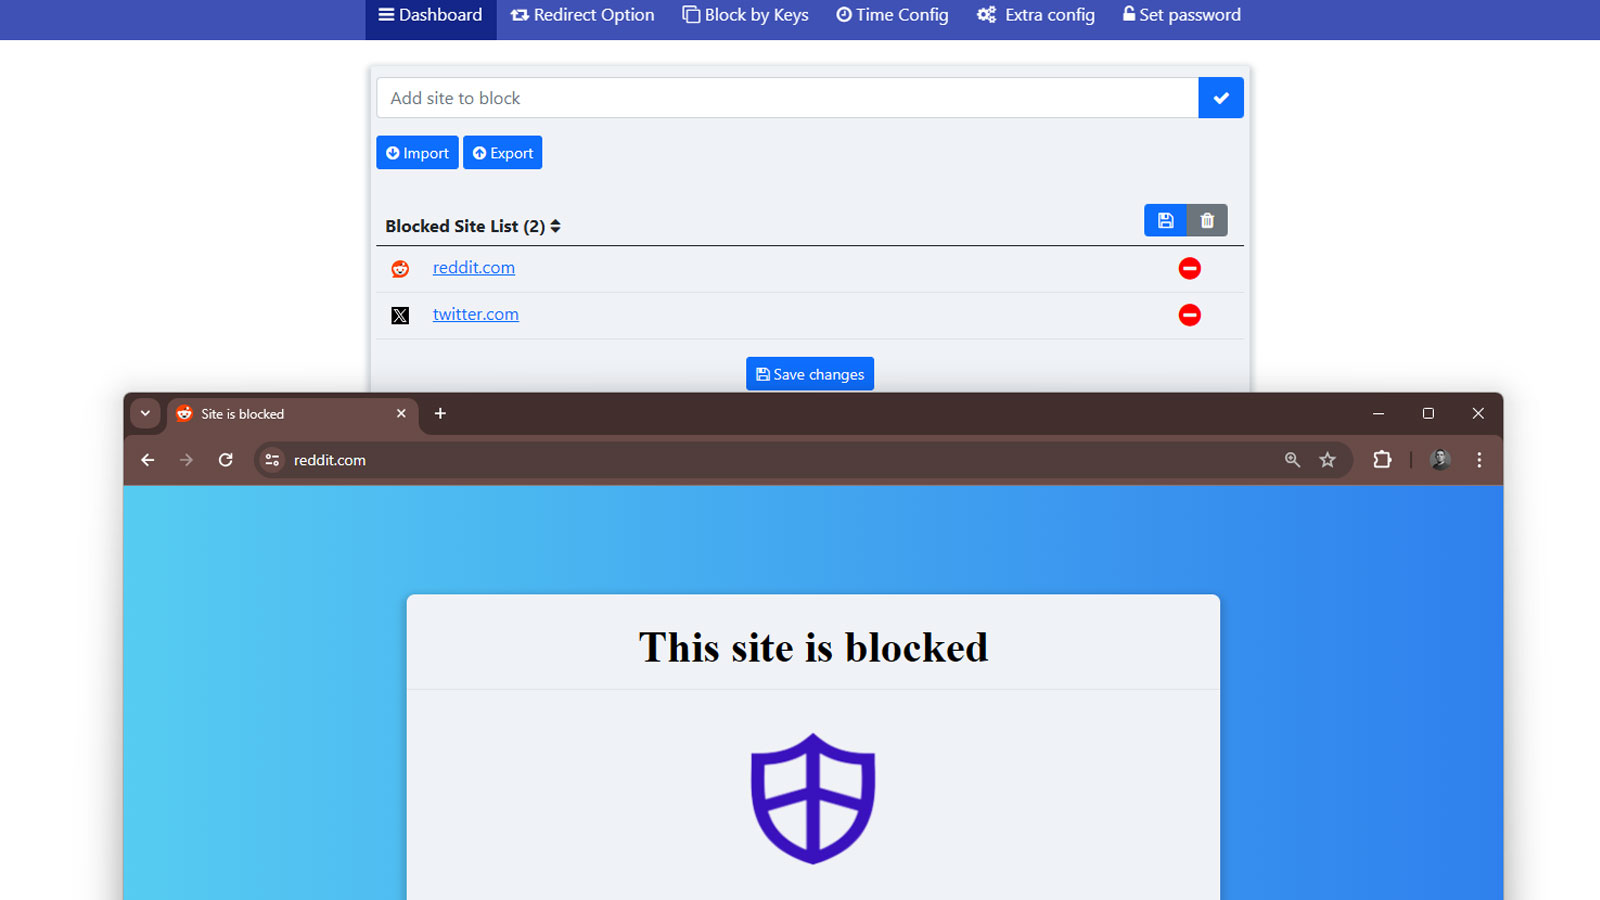 Blocked websites with extensions.